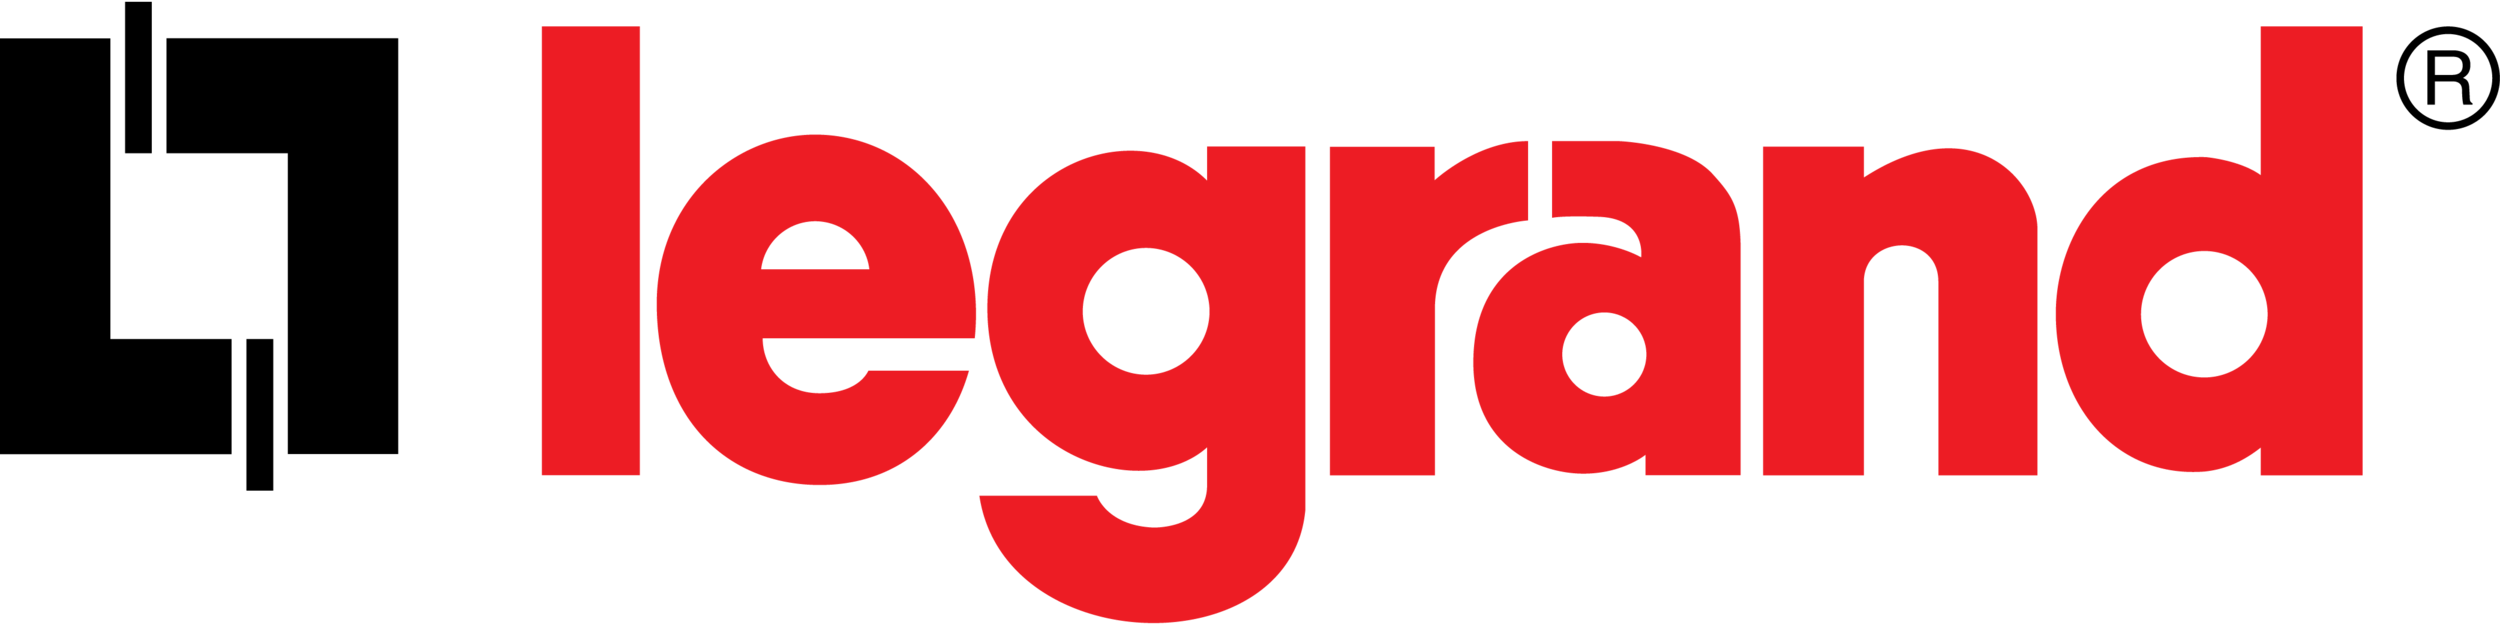 Legrand-Red-PNG.png